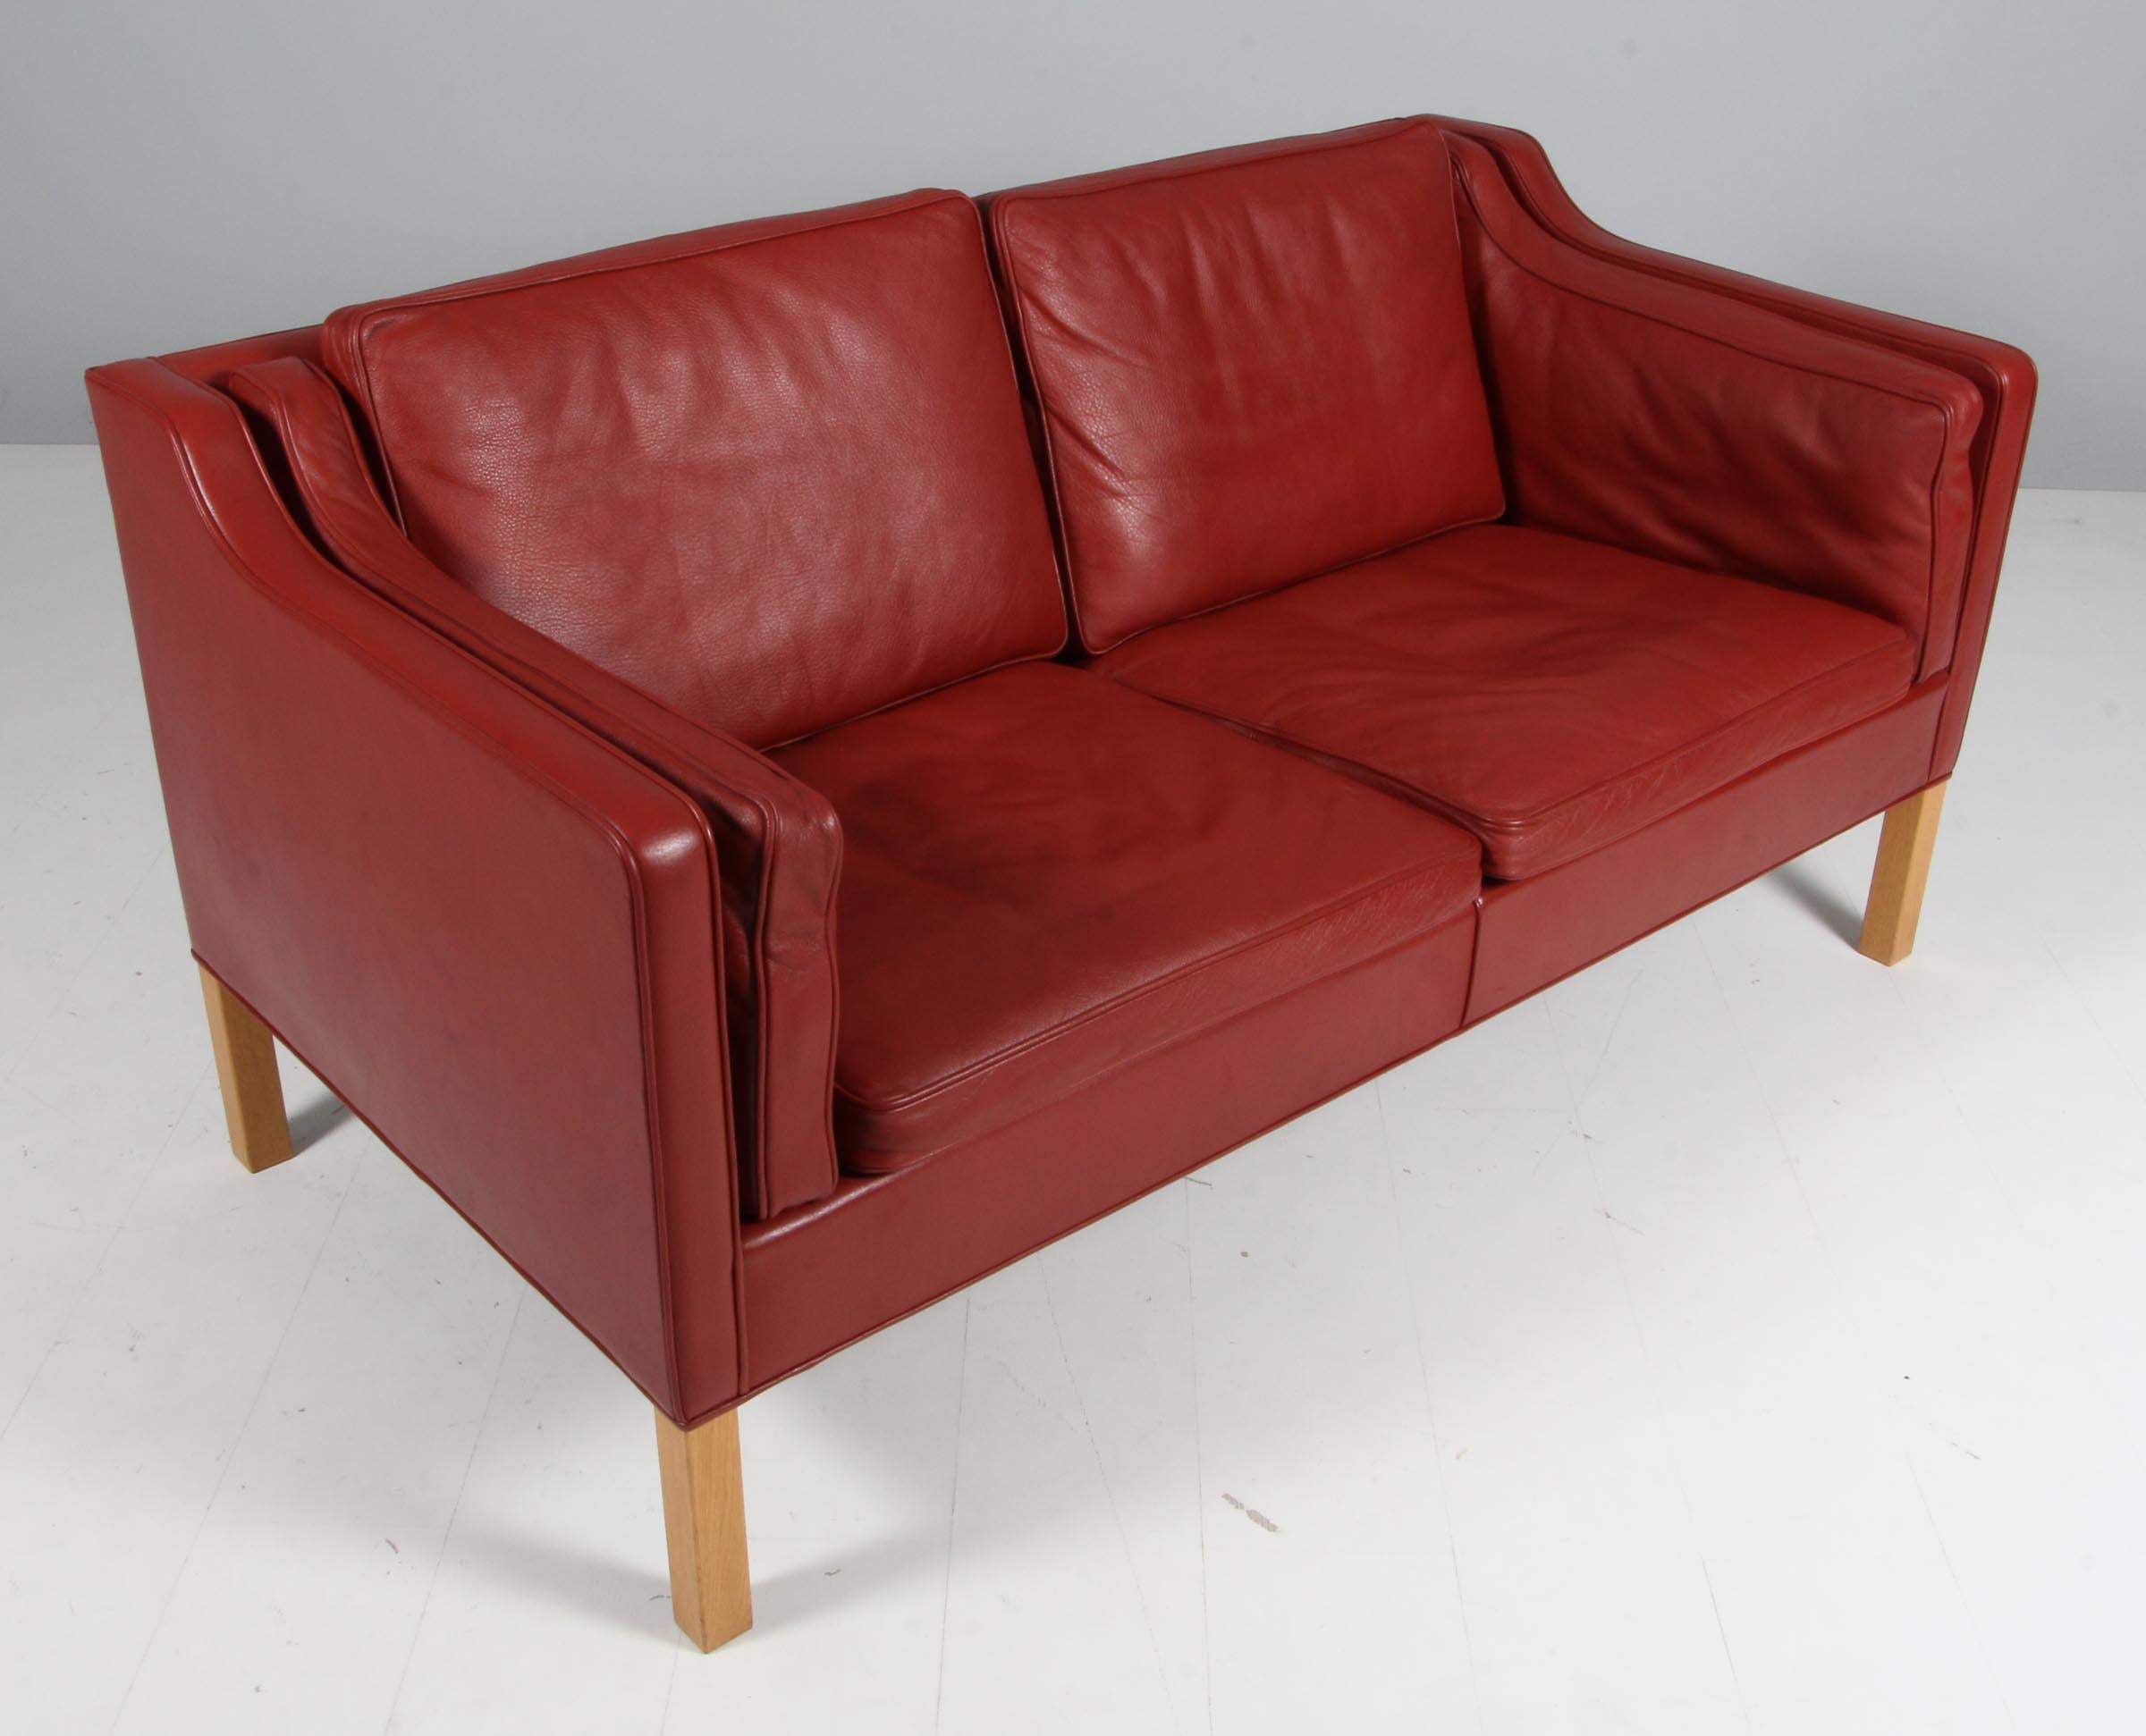 Børge Mogensen two-seat sofa with original patinated leather upholstery.

Legs of oak.

Model 2212, made by Fredericia Furniture.